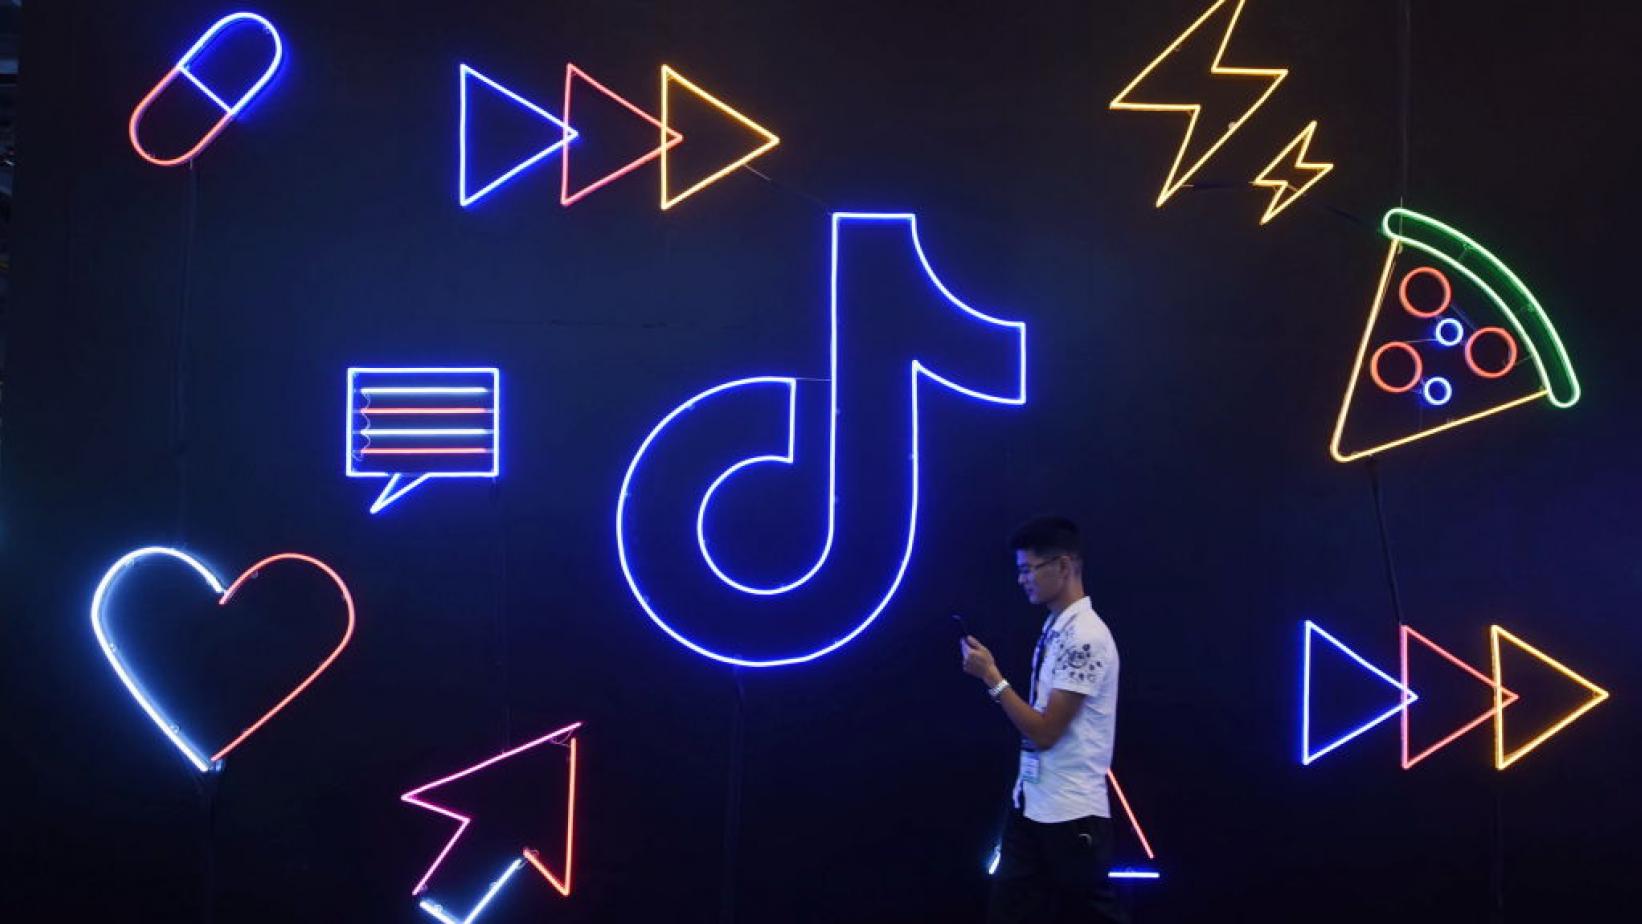 The Top 10 Most Played Songs on TikTok - Discover Them Here